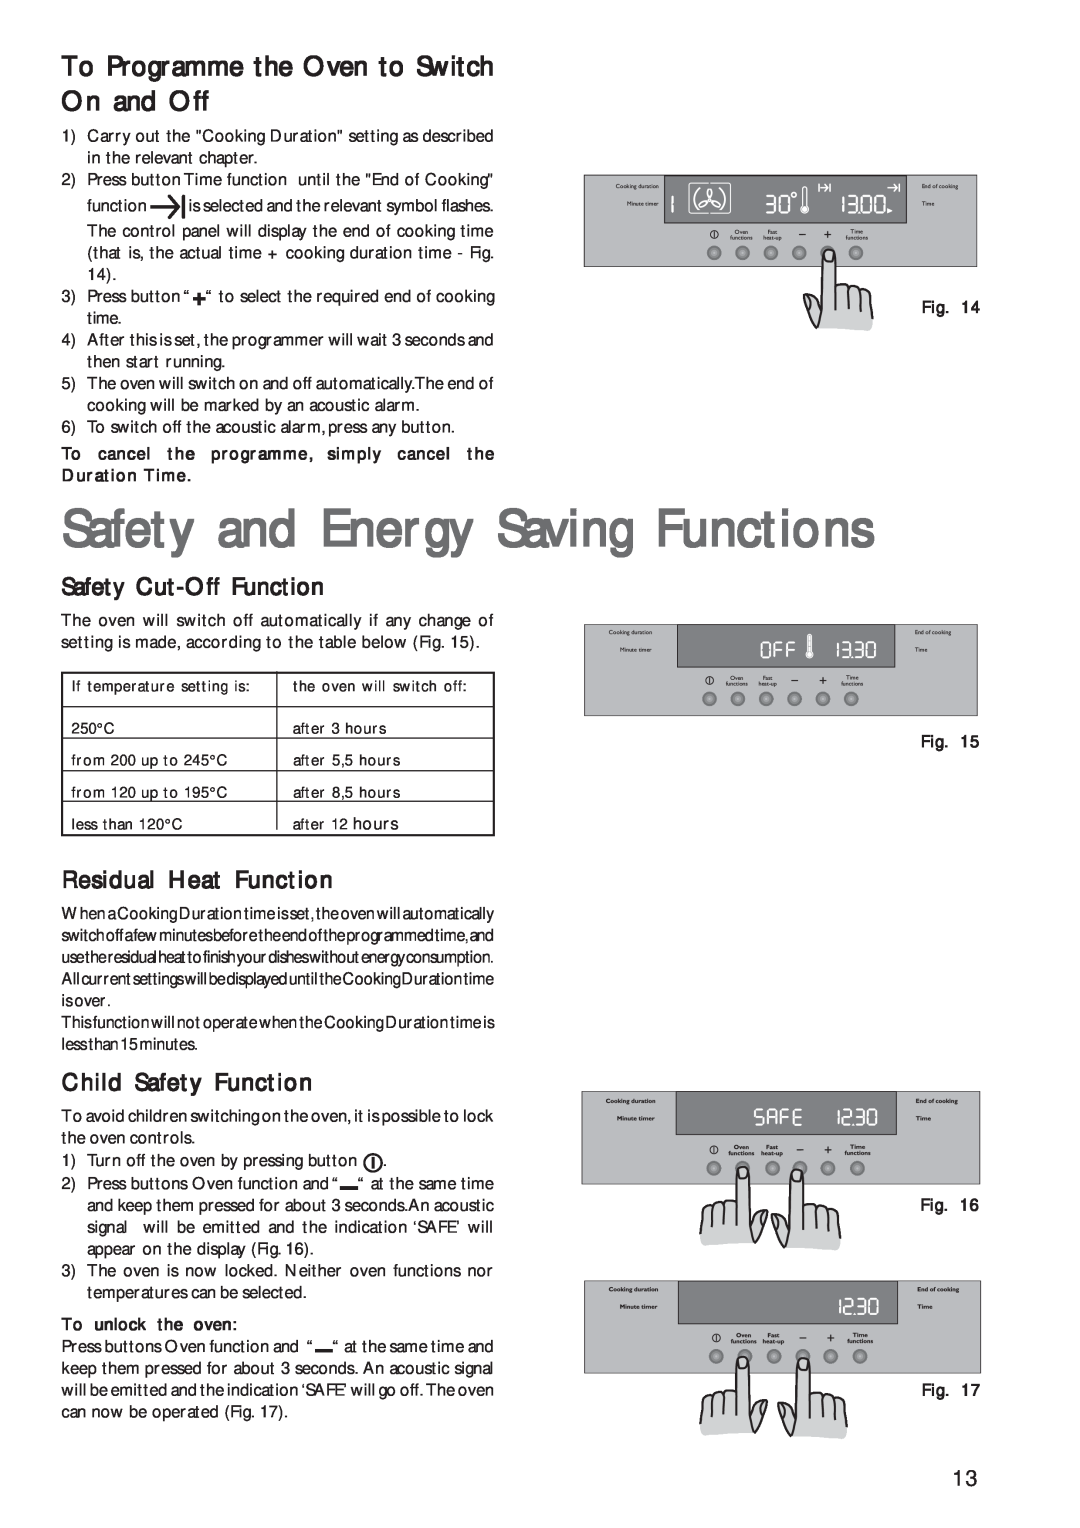 John Lewis JLBIOS602 Safety and Energy Saving Functions, To Programme the Oven to Switch On and Off, Child Safety Function 